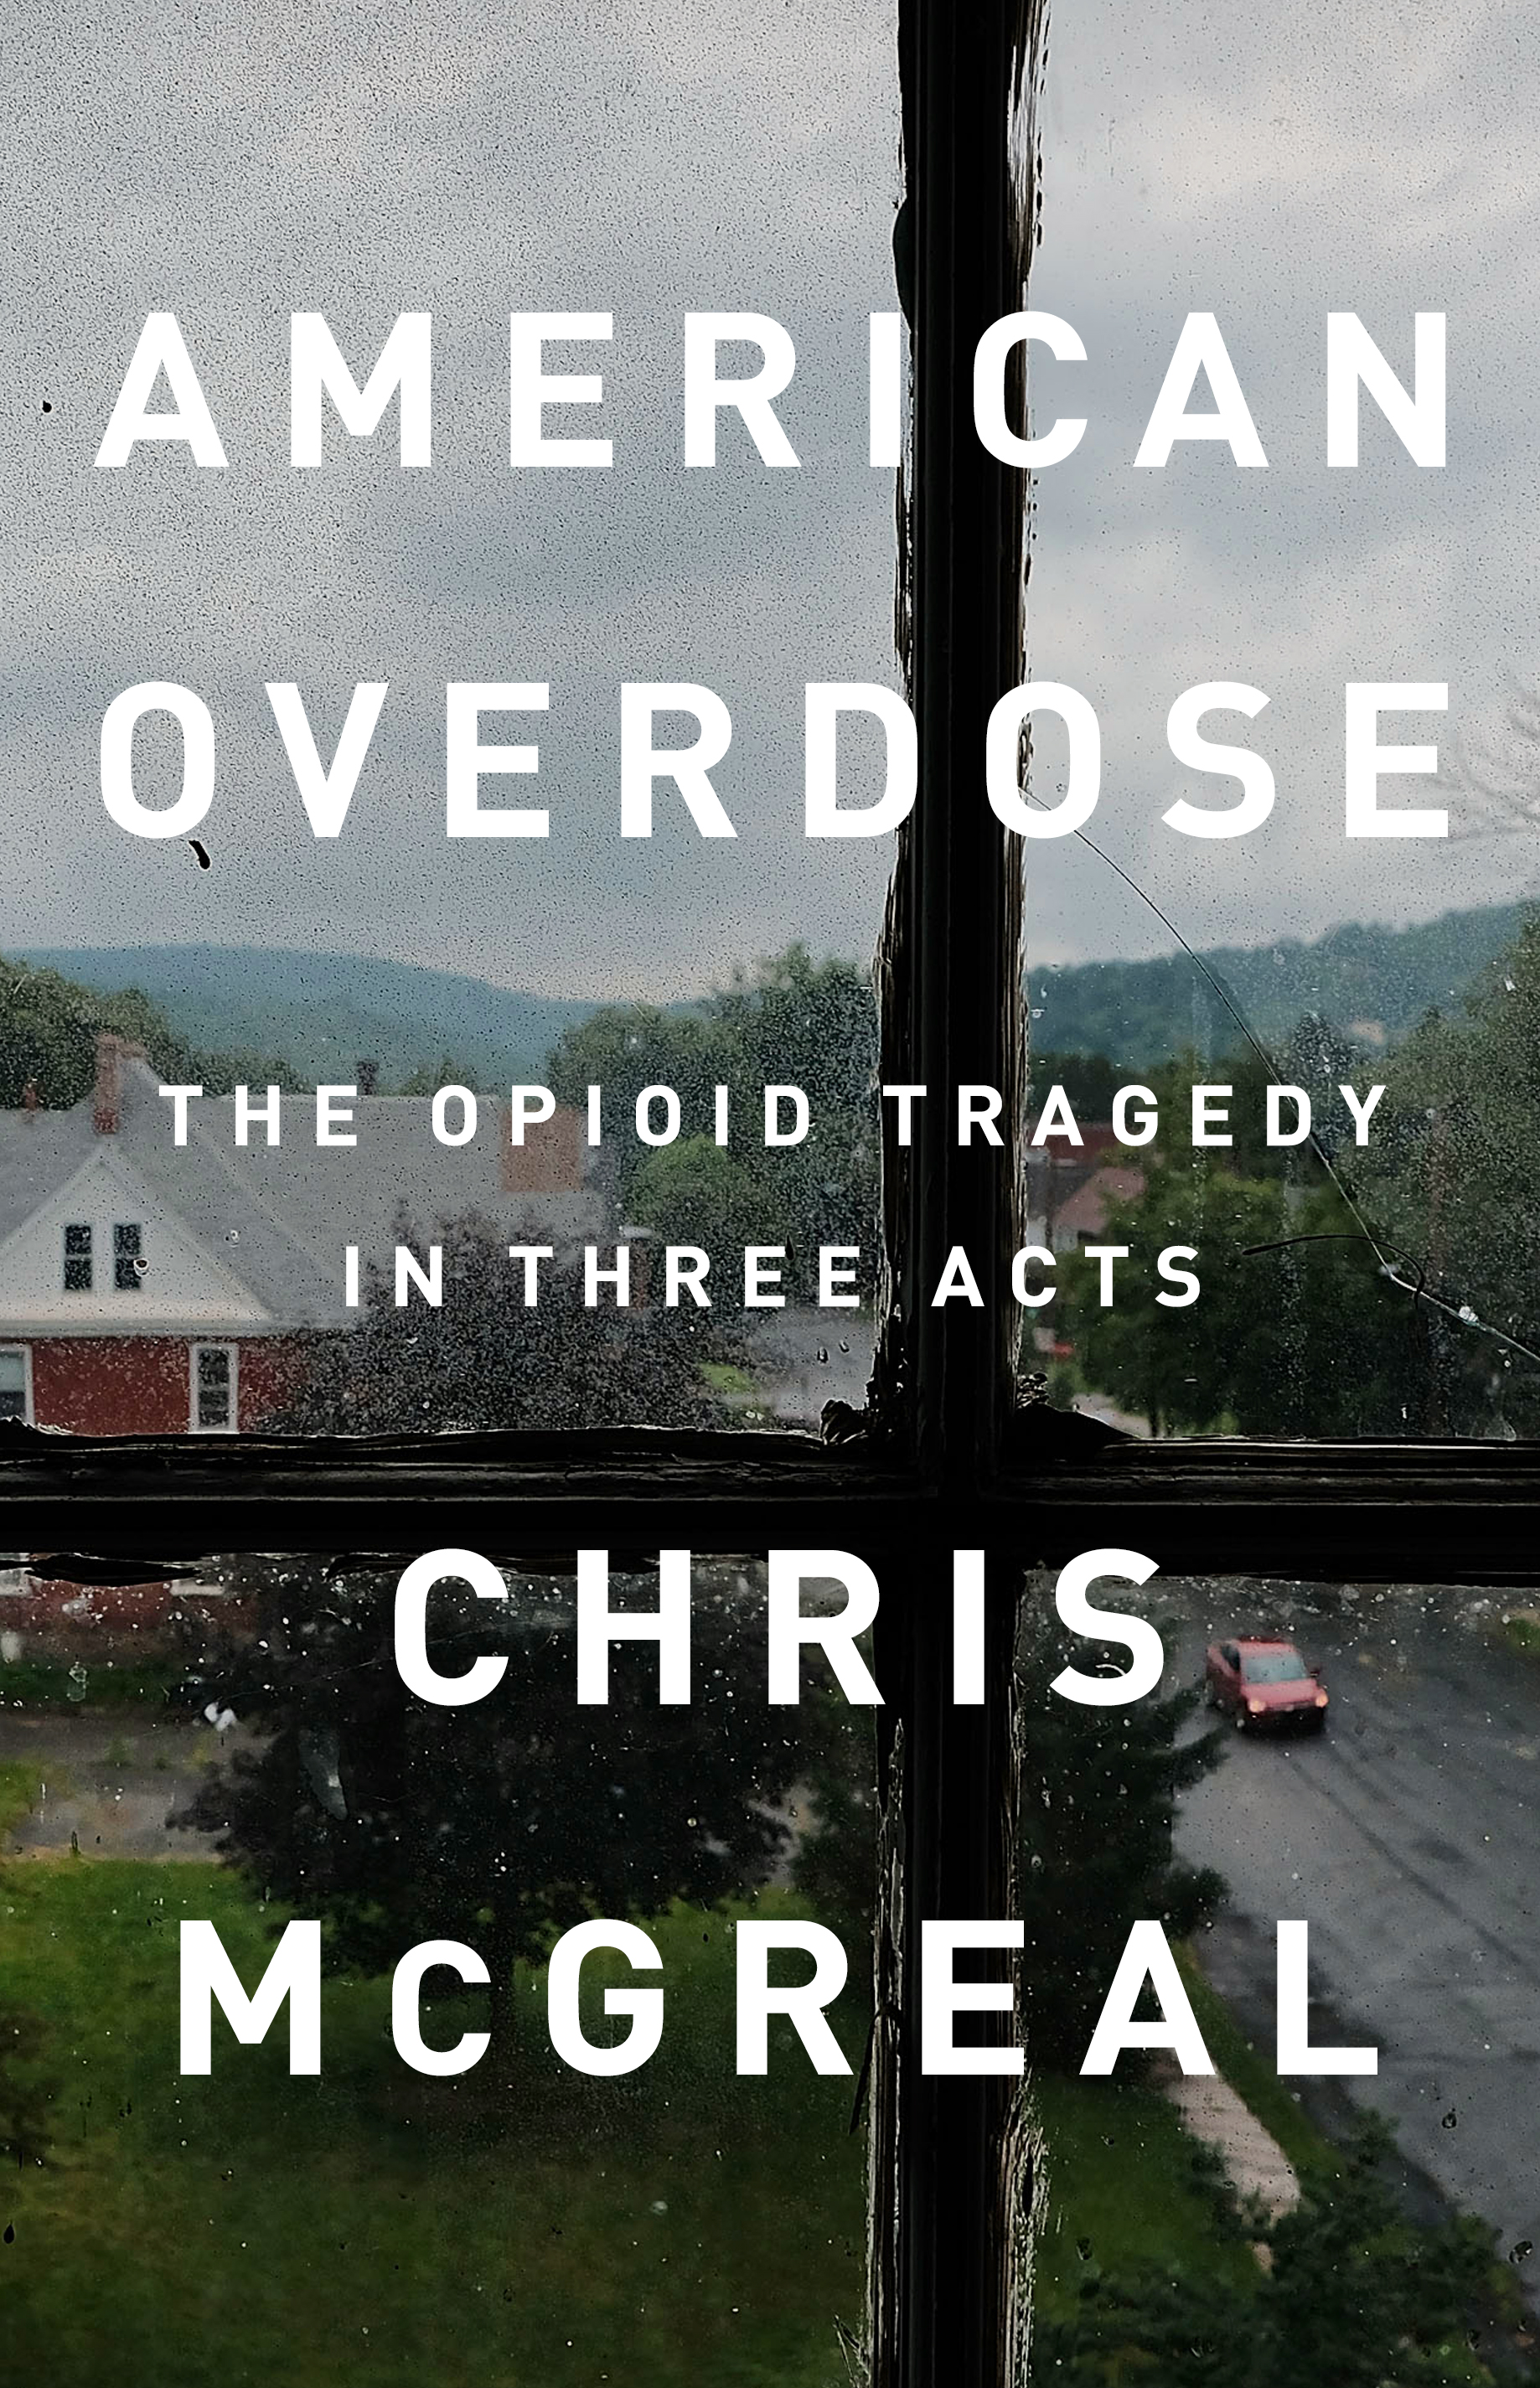 Book Launch: American Overdose: The Opioid Tragedy in Three Acts by Chris McGreal — in conversation w/ Philip Gourevitch